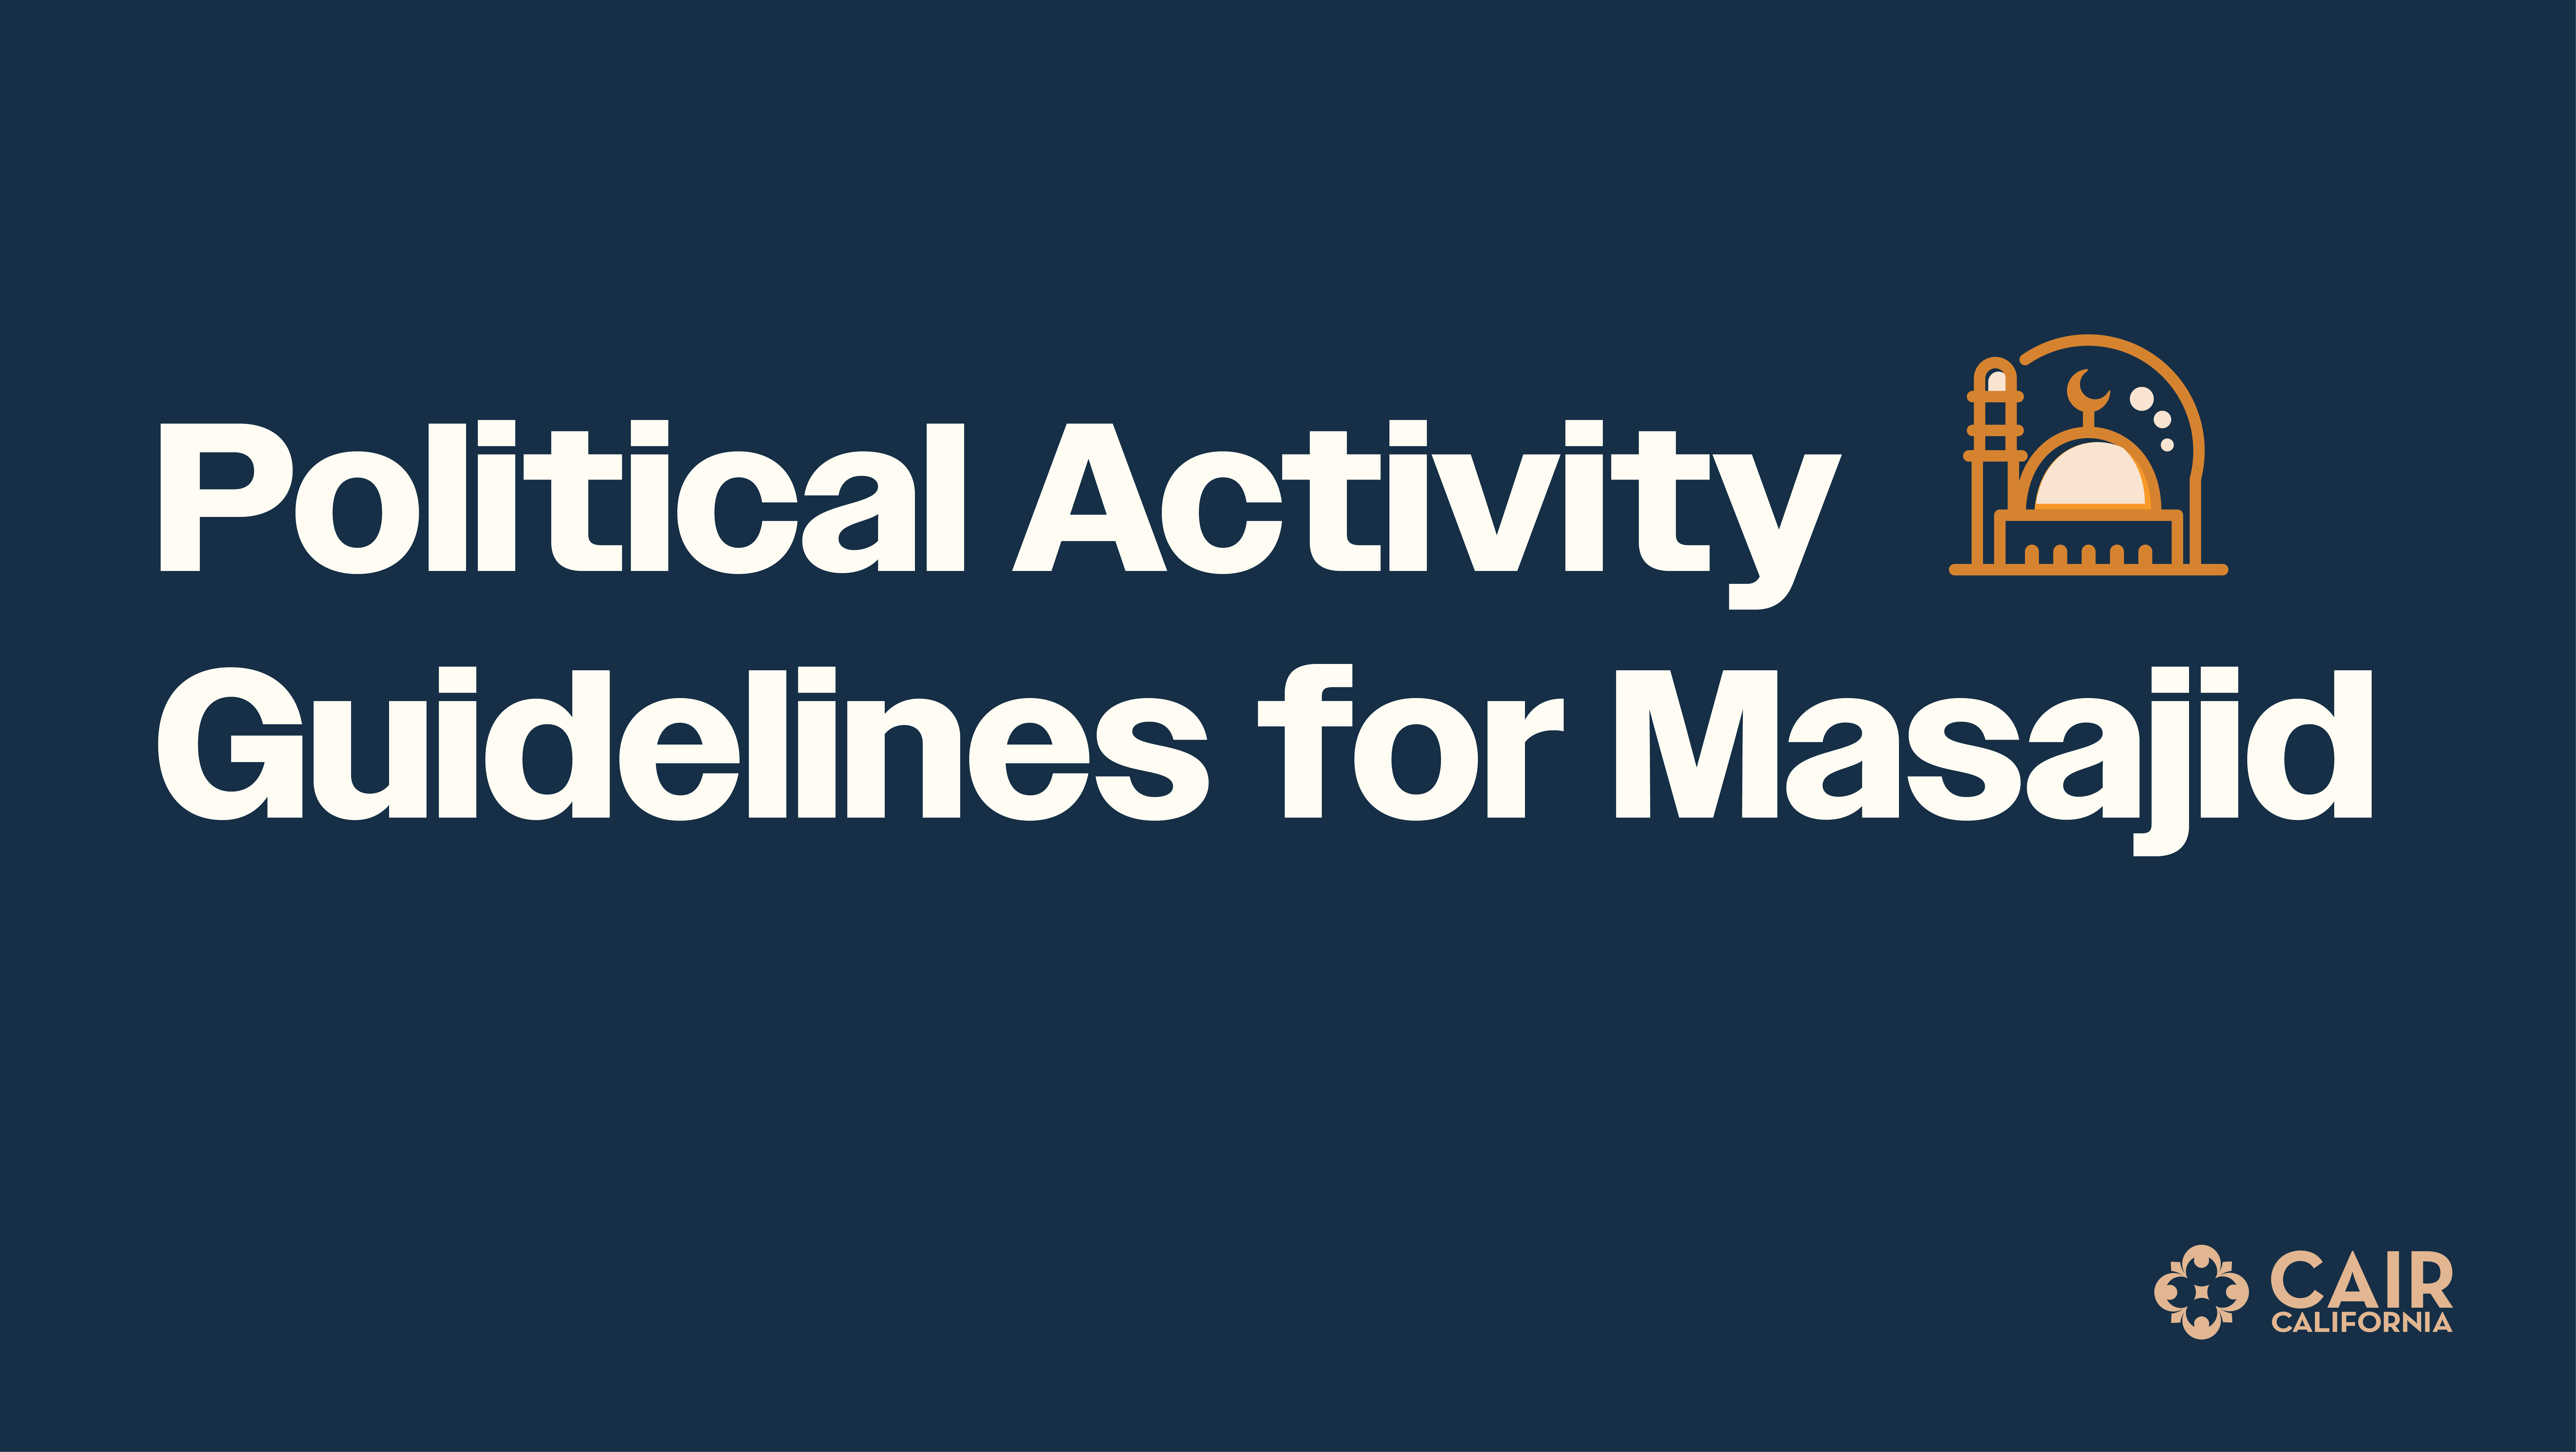 Political Activity Guidelines for Masjid